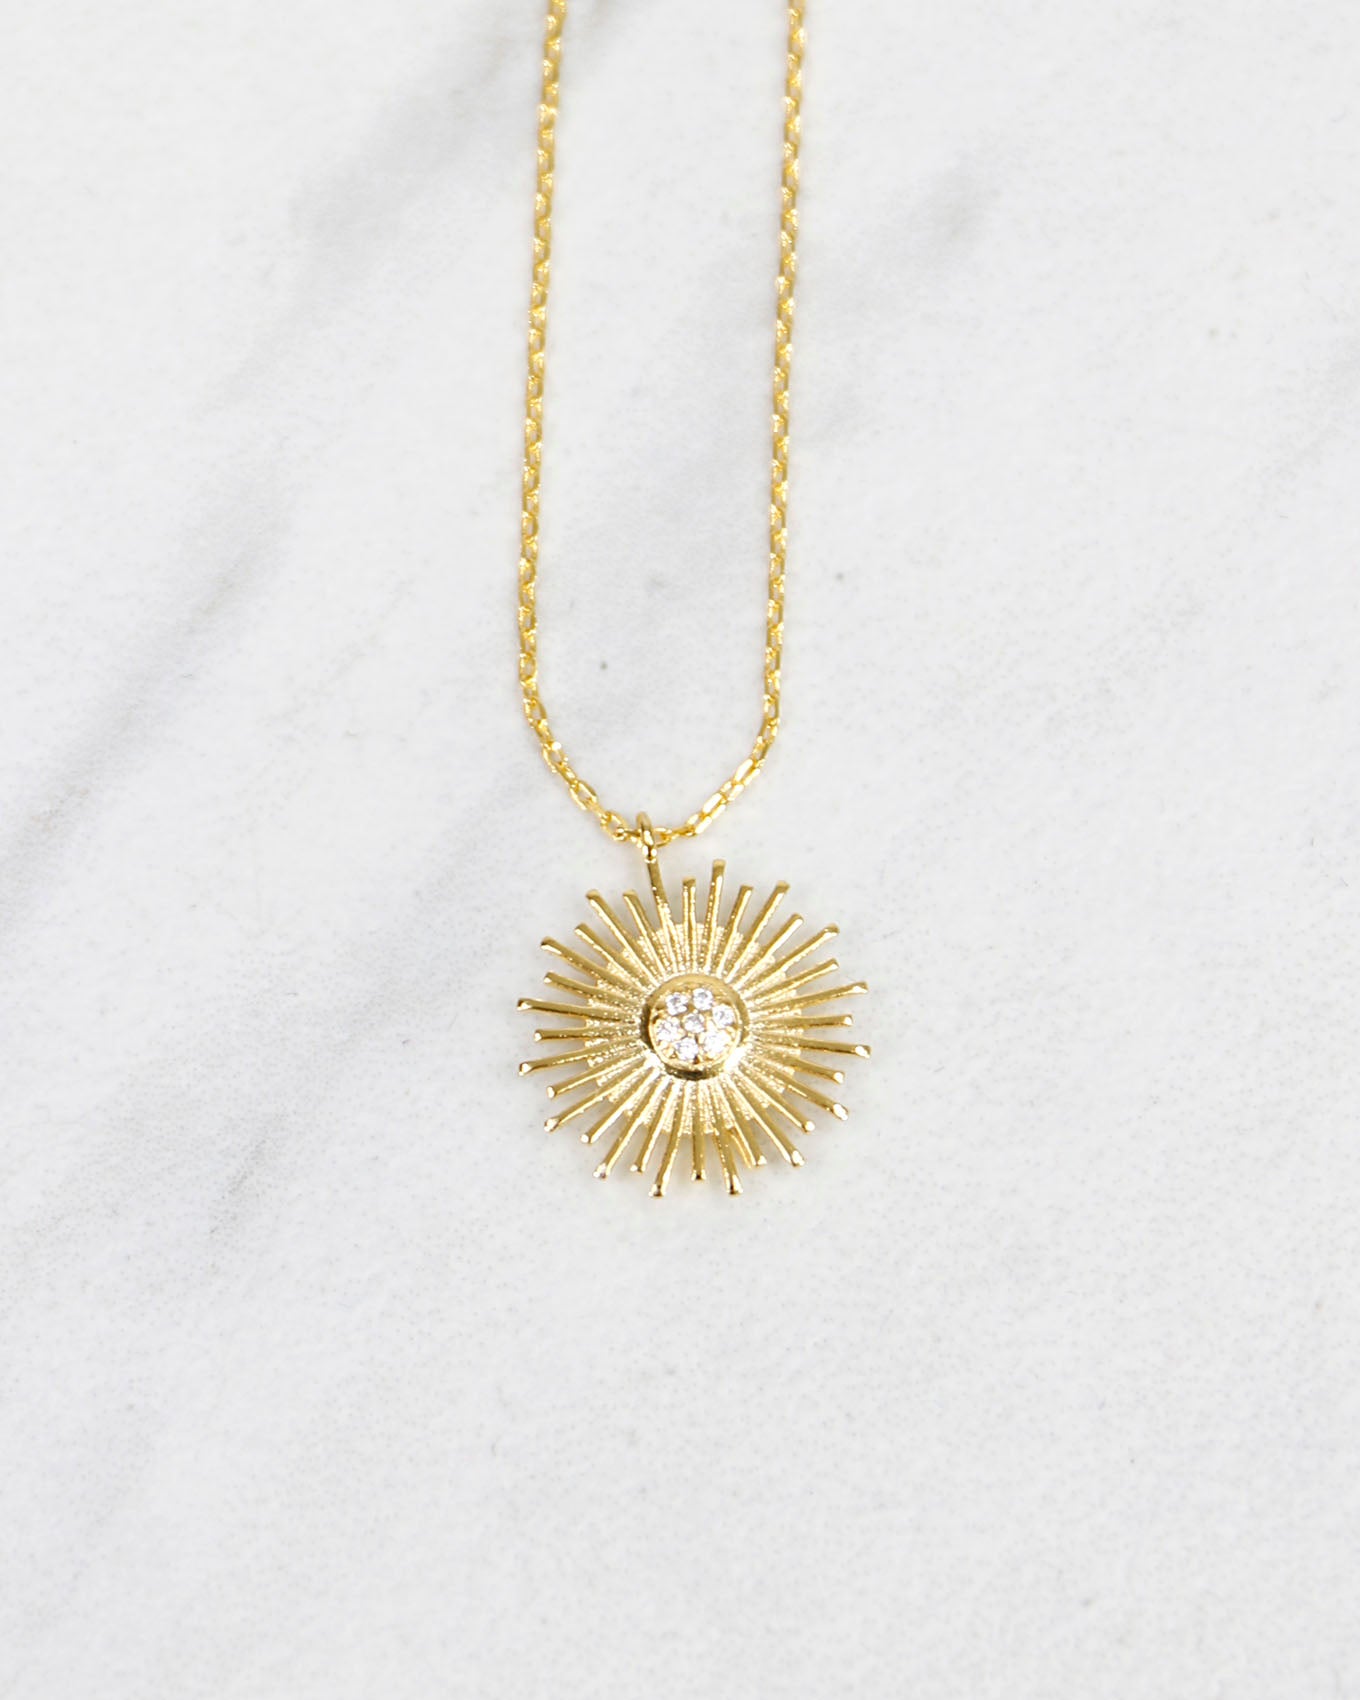 Sunburst Necklace in Gold - Grace and Lace